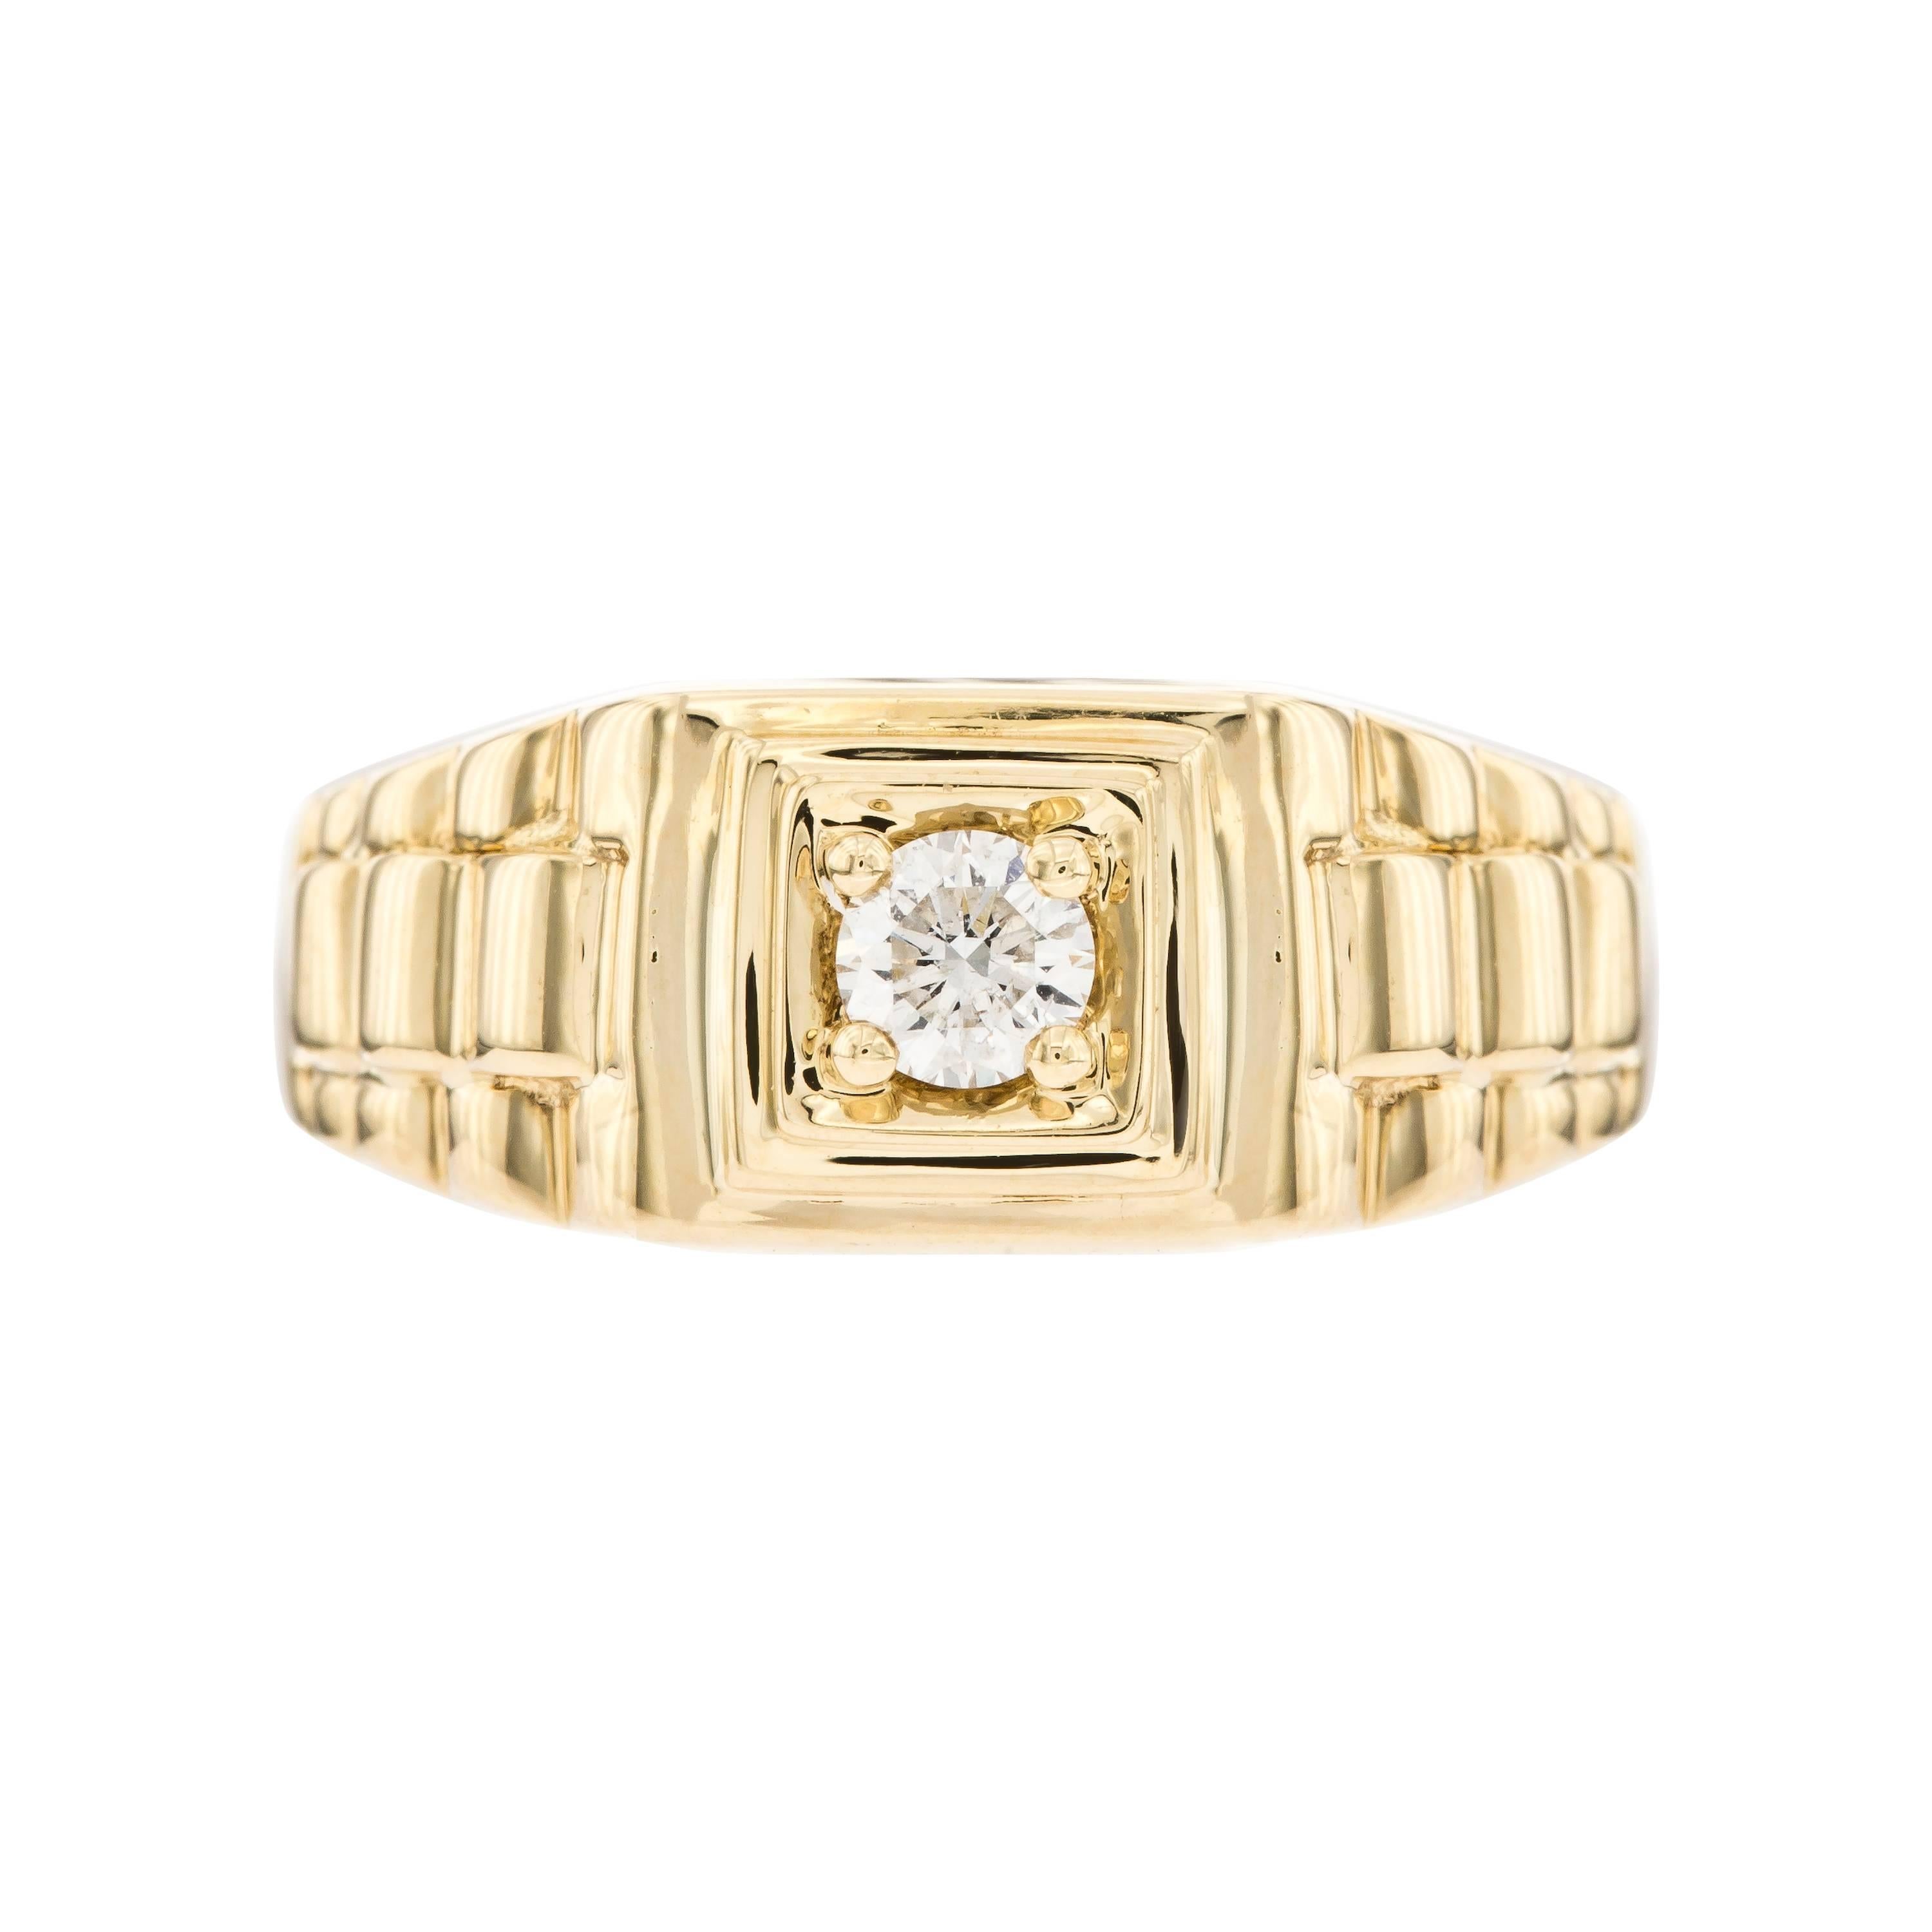 0.25 CT Round White Diamond 18 KT Yellow Gold Solitaire Gents Signet Ring